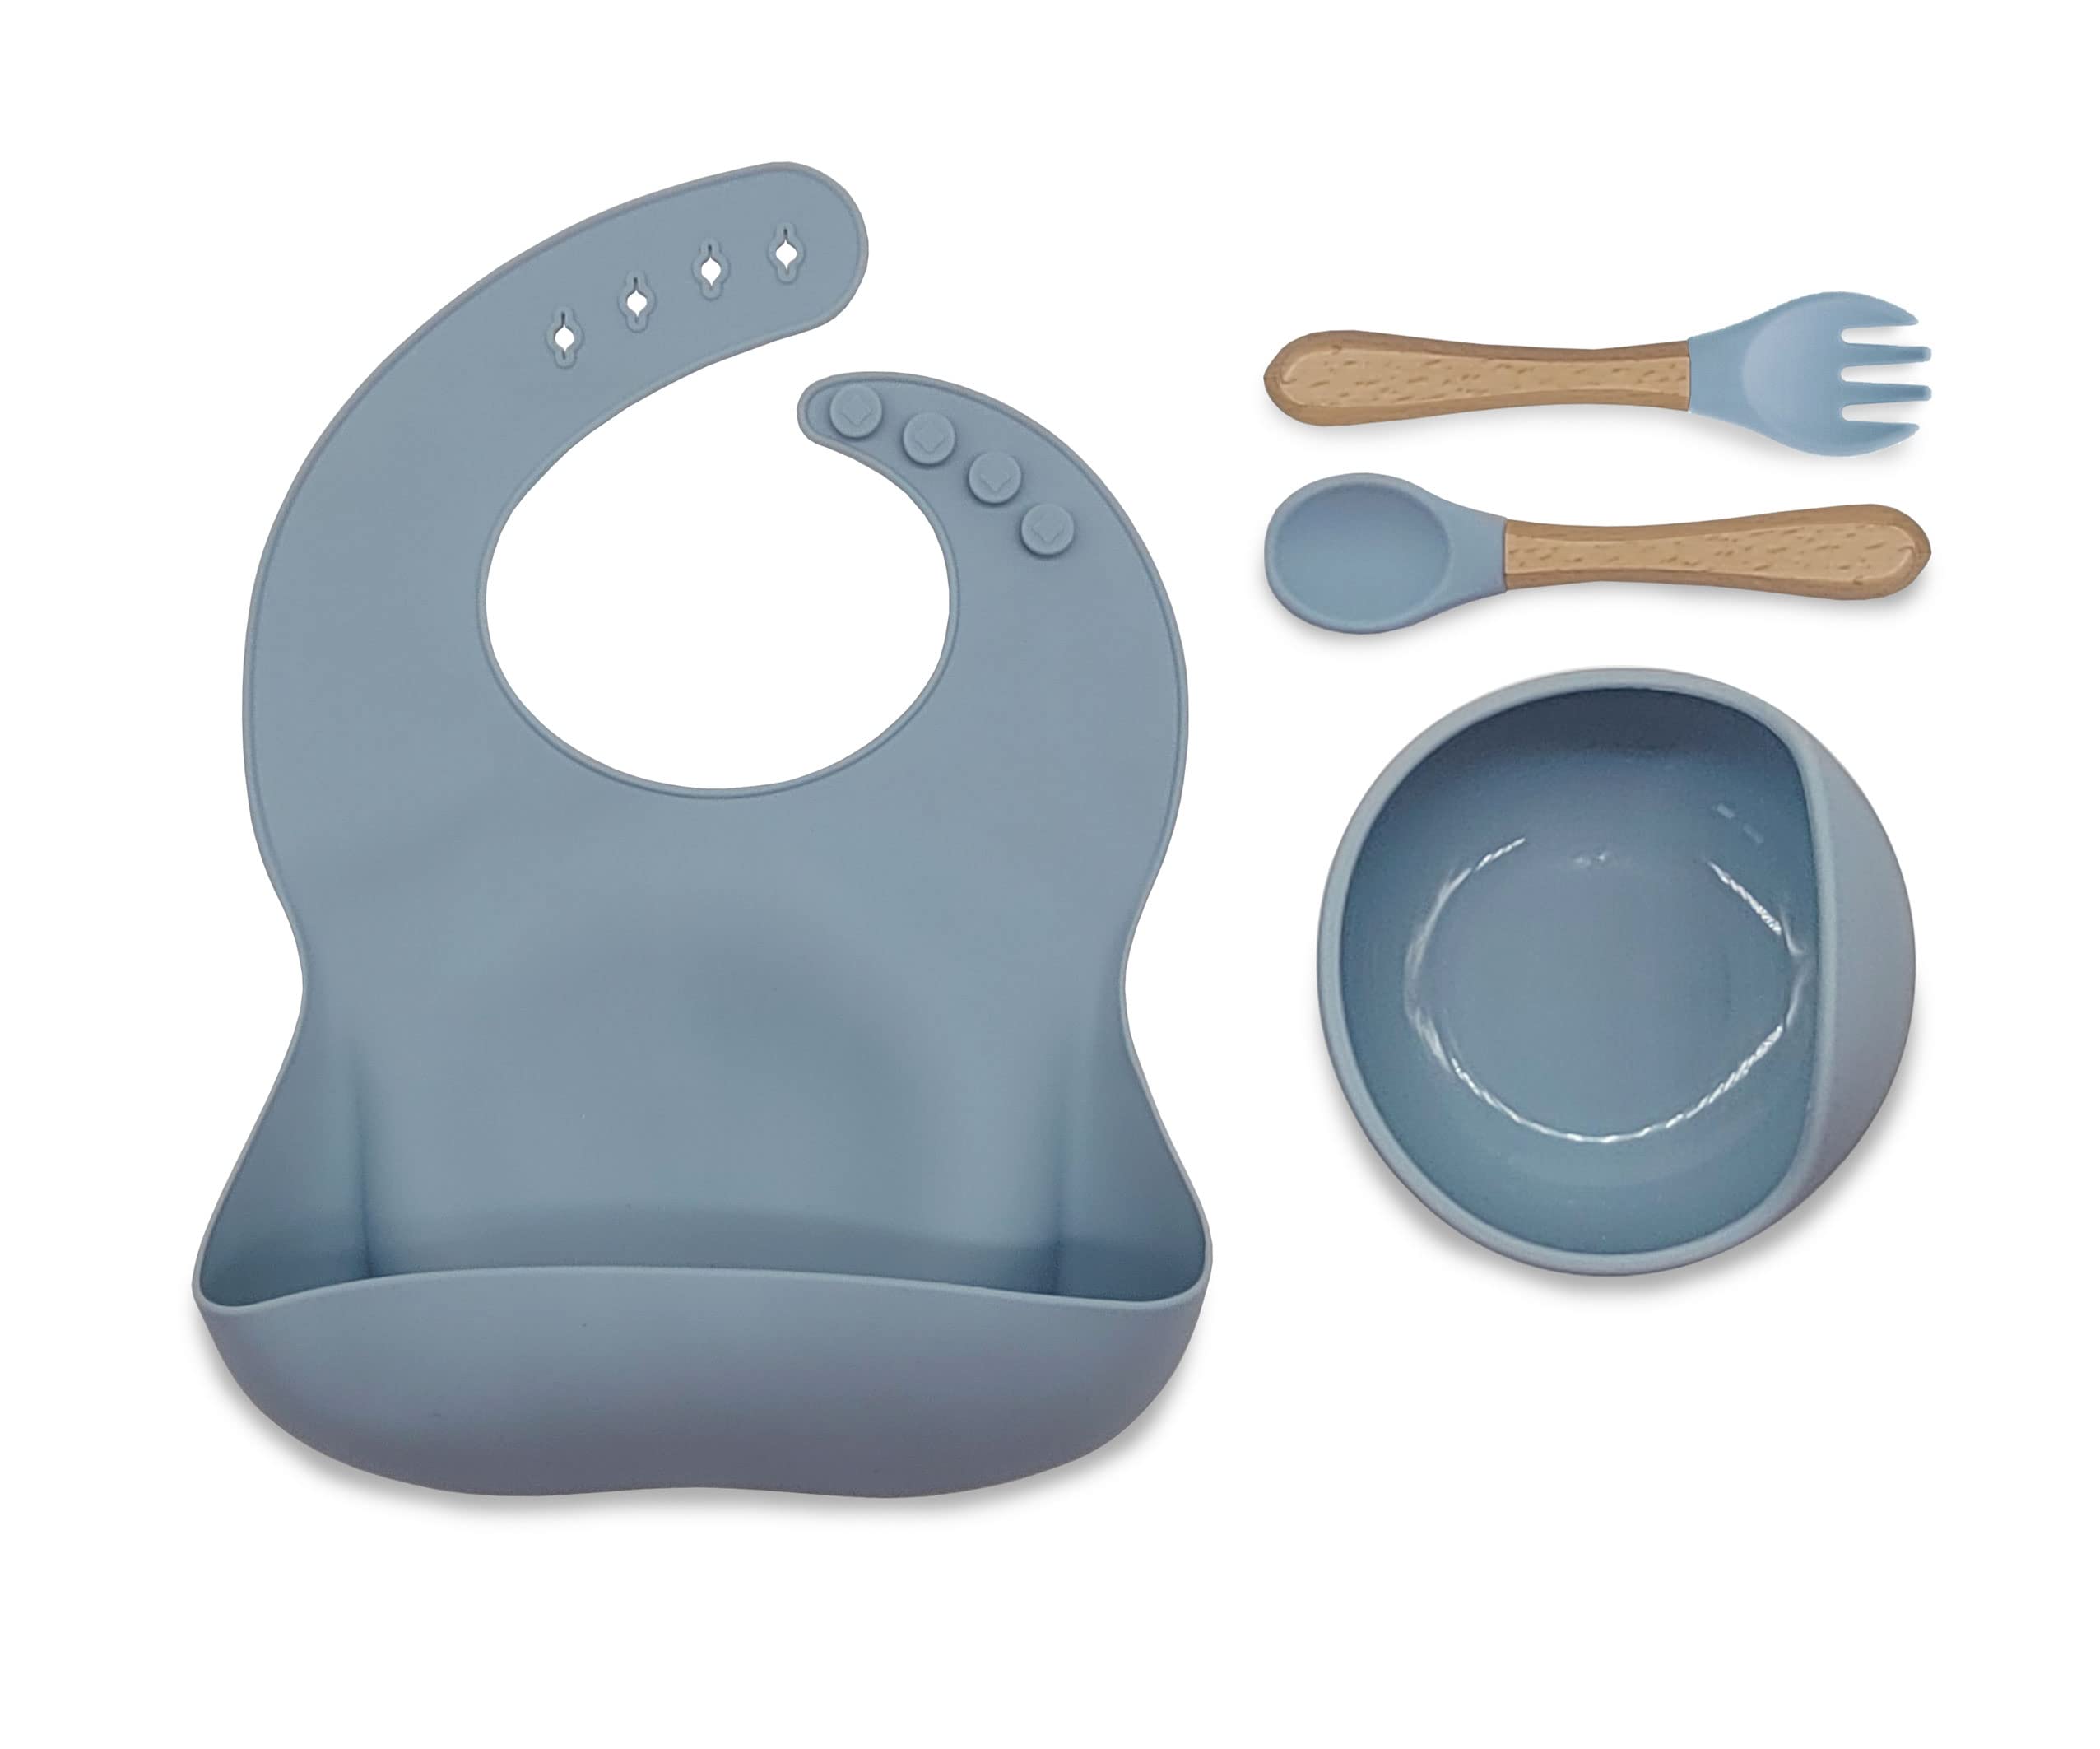 Baby Weaning Set - Silicone Baby Feeding Set with Bib, Bowl, Spoon & Fork. for Babies and Toddlers - BPA Free (Dusty Blue)